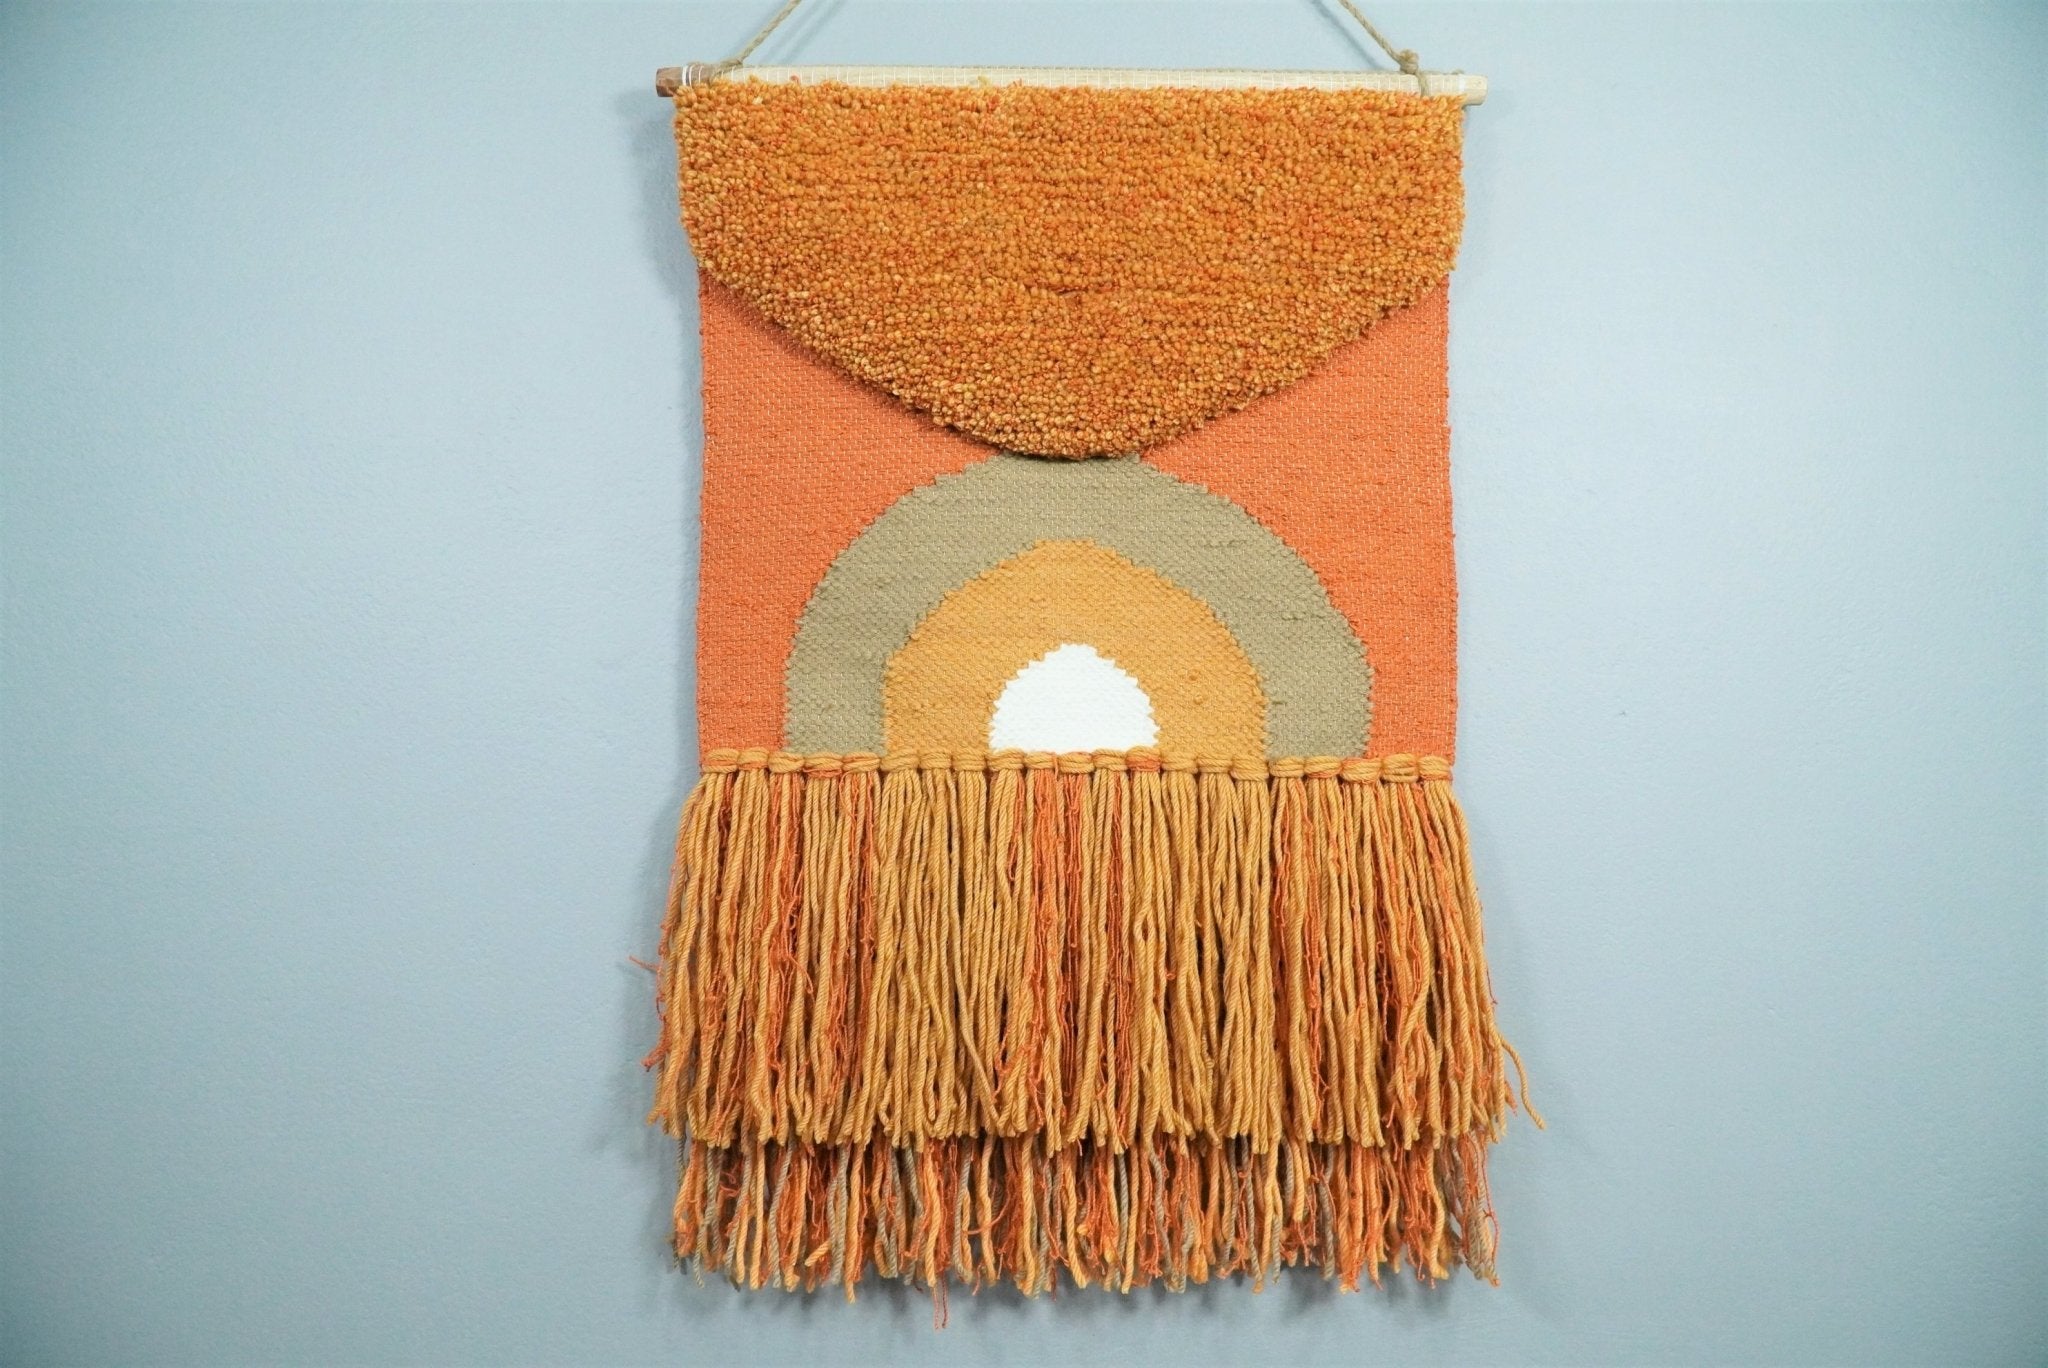 Woven Floral Wall Hanging autumn colours  Weaving loom projects, Handwoven  tapestry, Macrame patterns tutorials